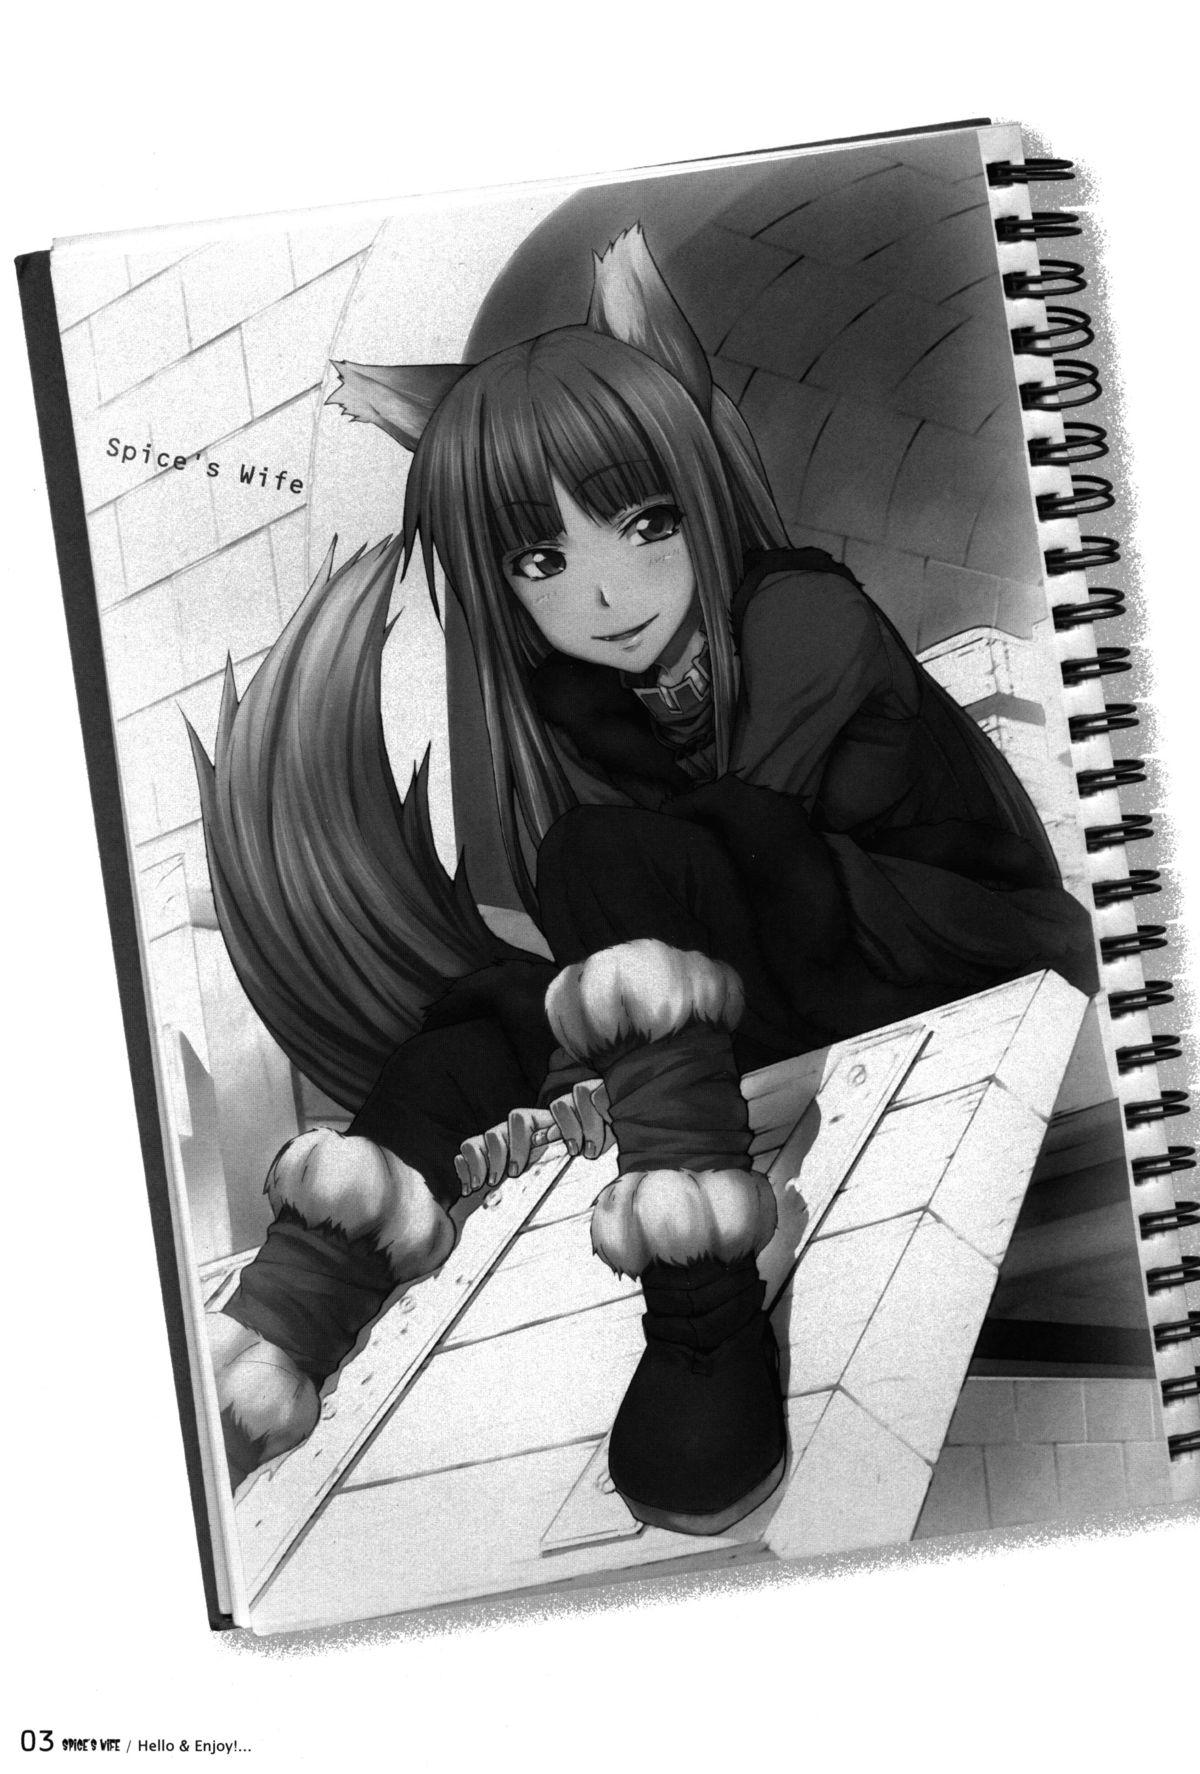 Gayfuck SPiCE'S WiFE - Spice and wolf Nylon - Page 3